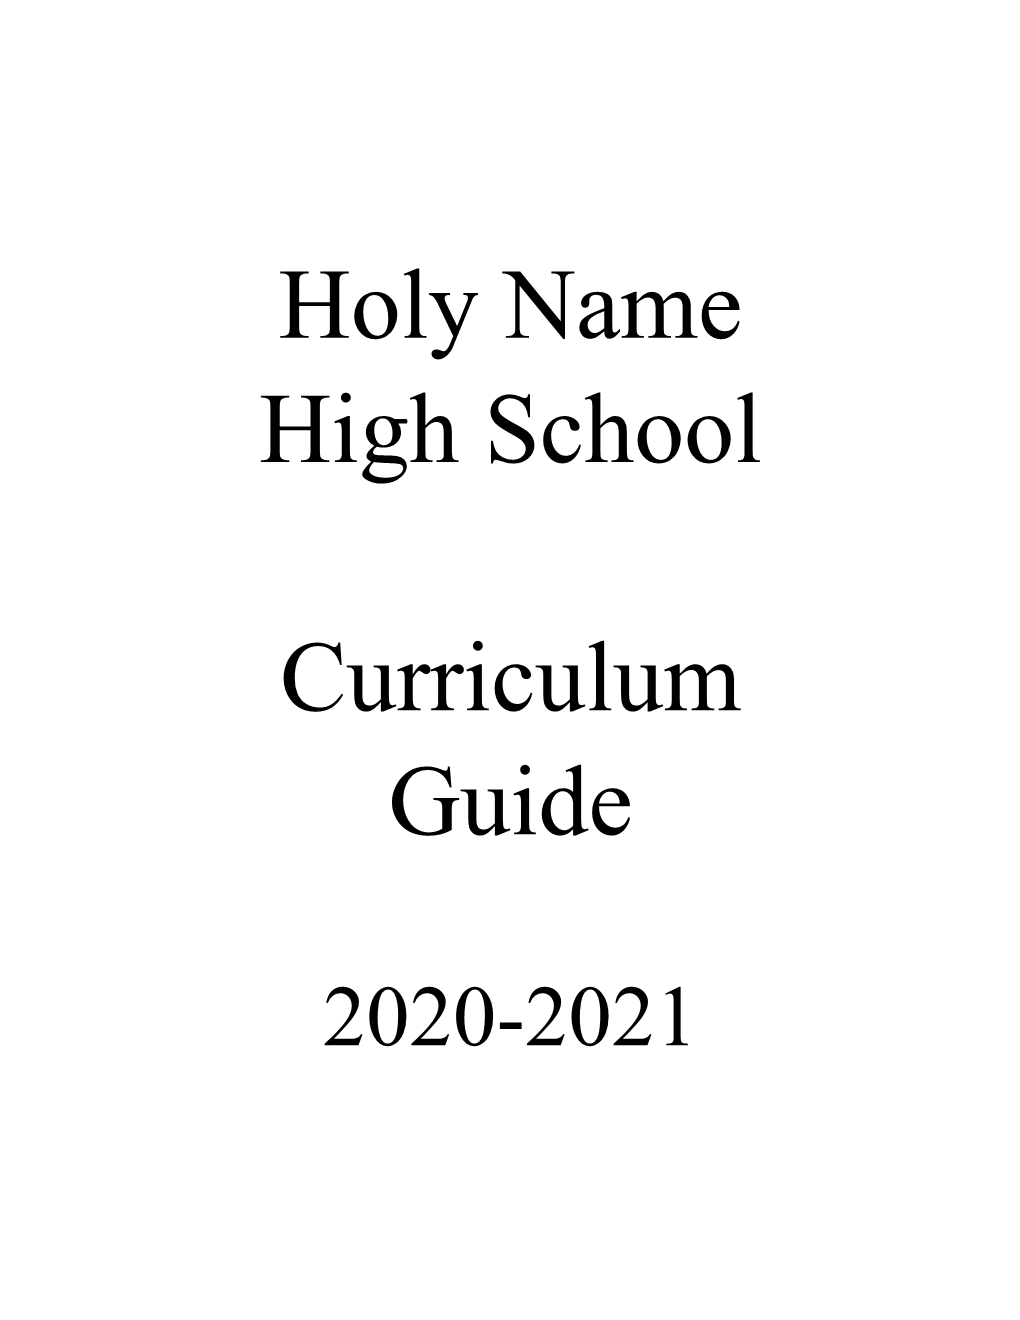 Holy Name High School Curriculum Guide